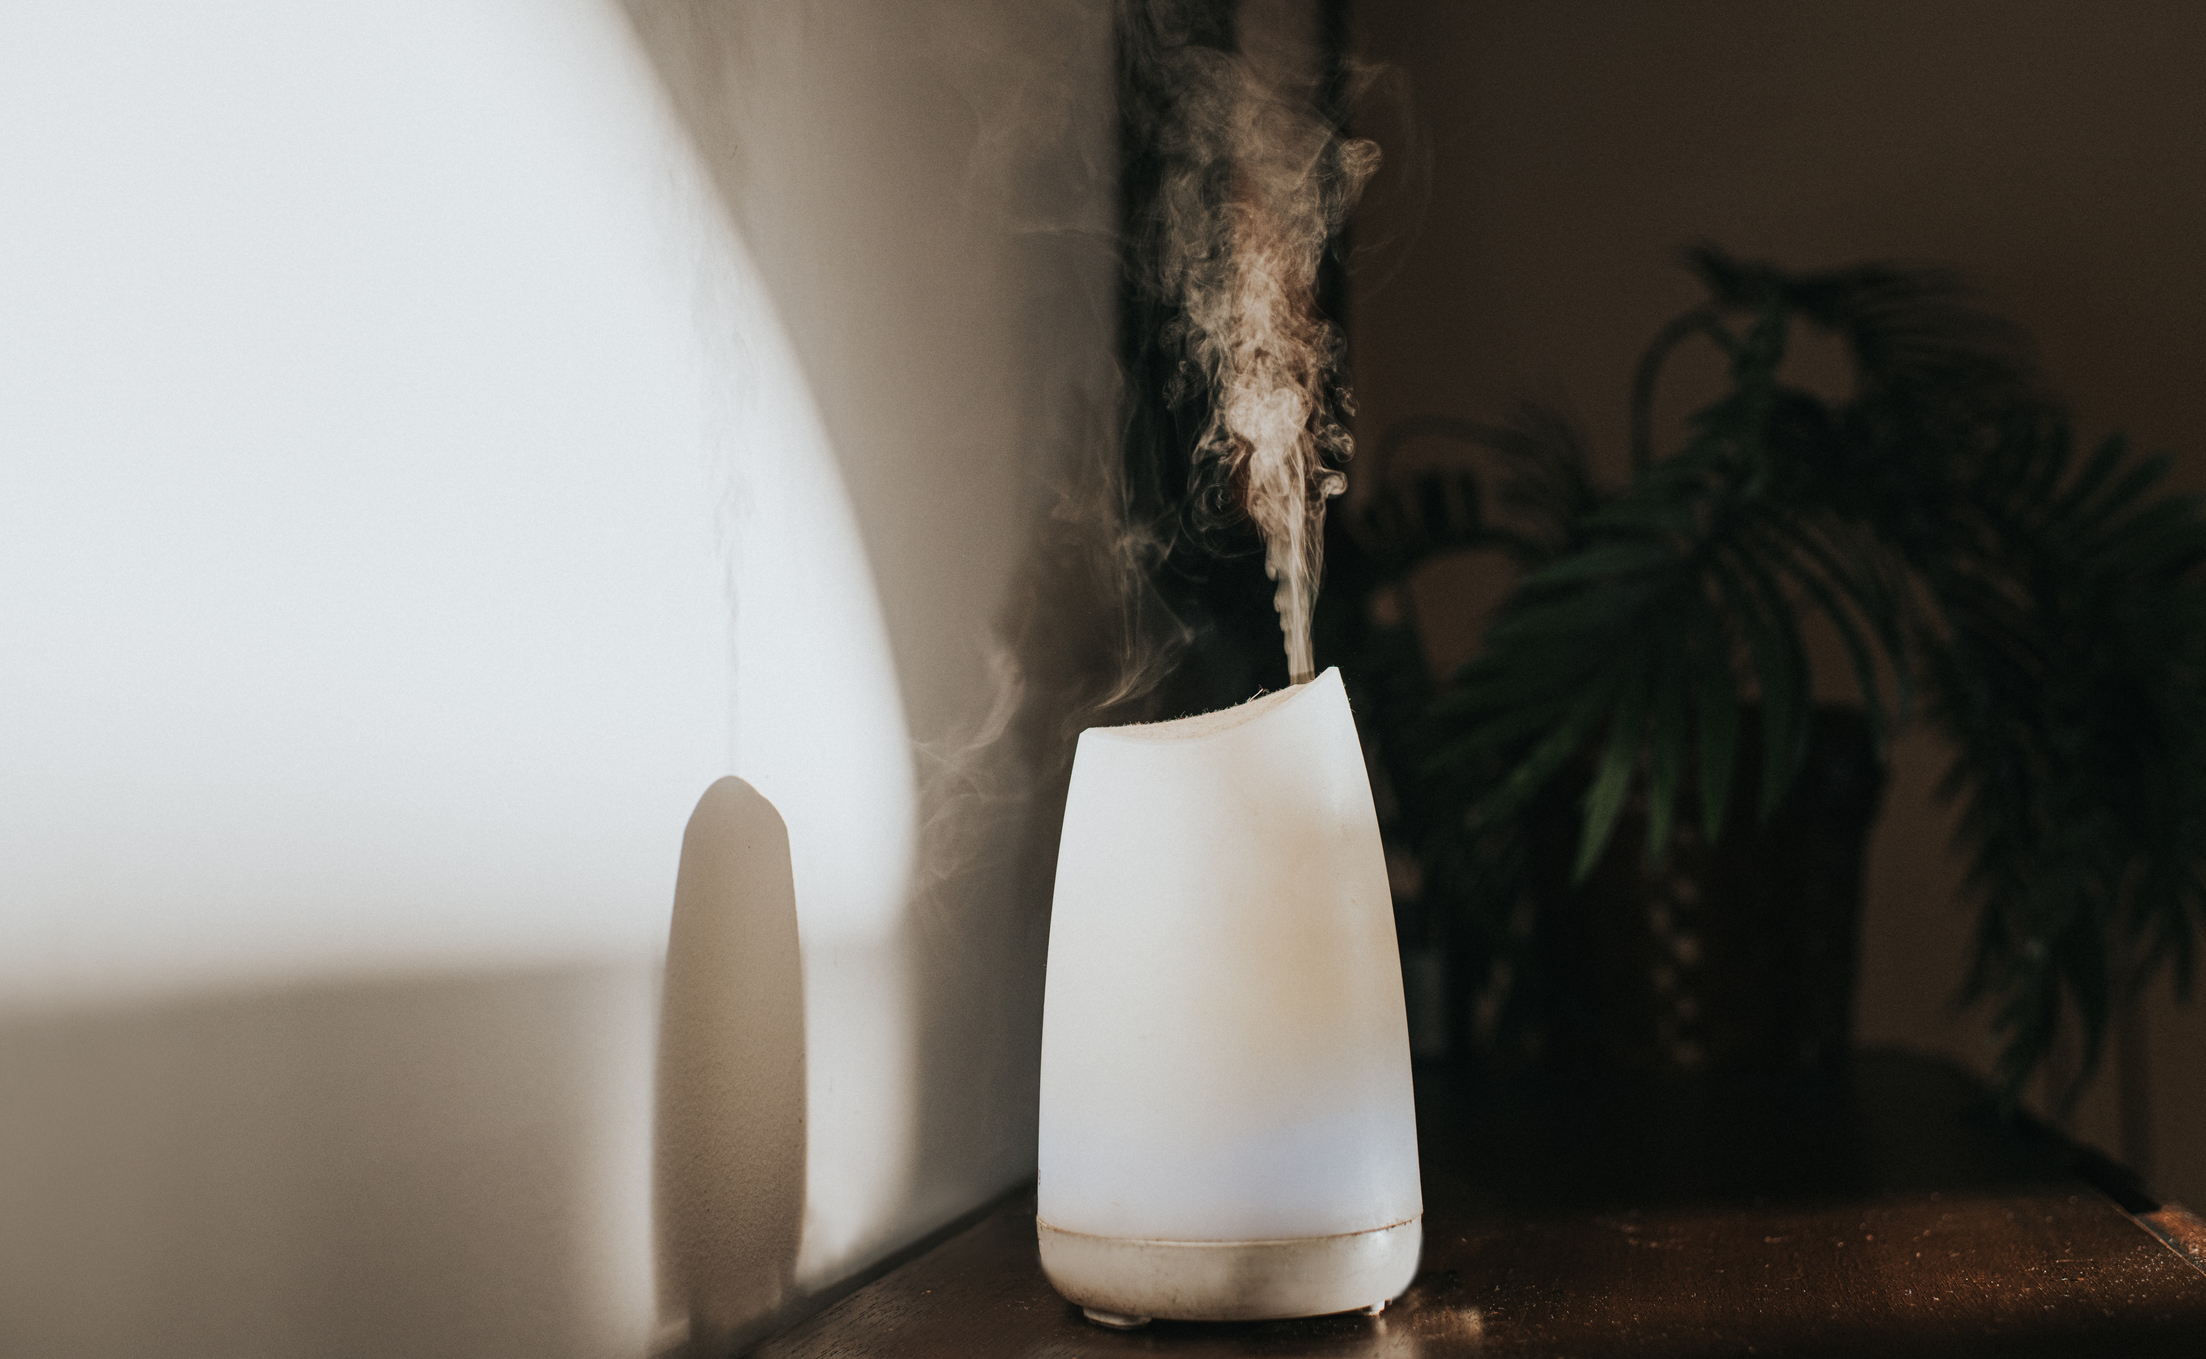 A simple white oil diffuser spritzing a light mist of water and aromatherapy blended oils into the air